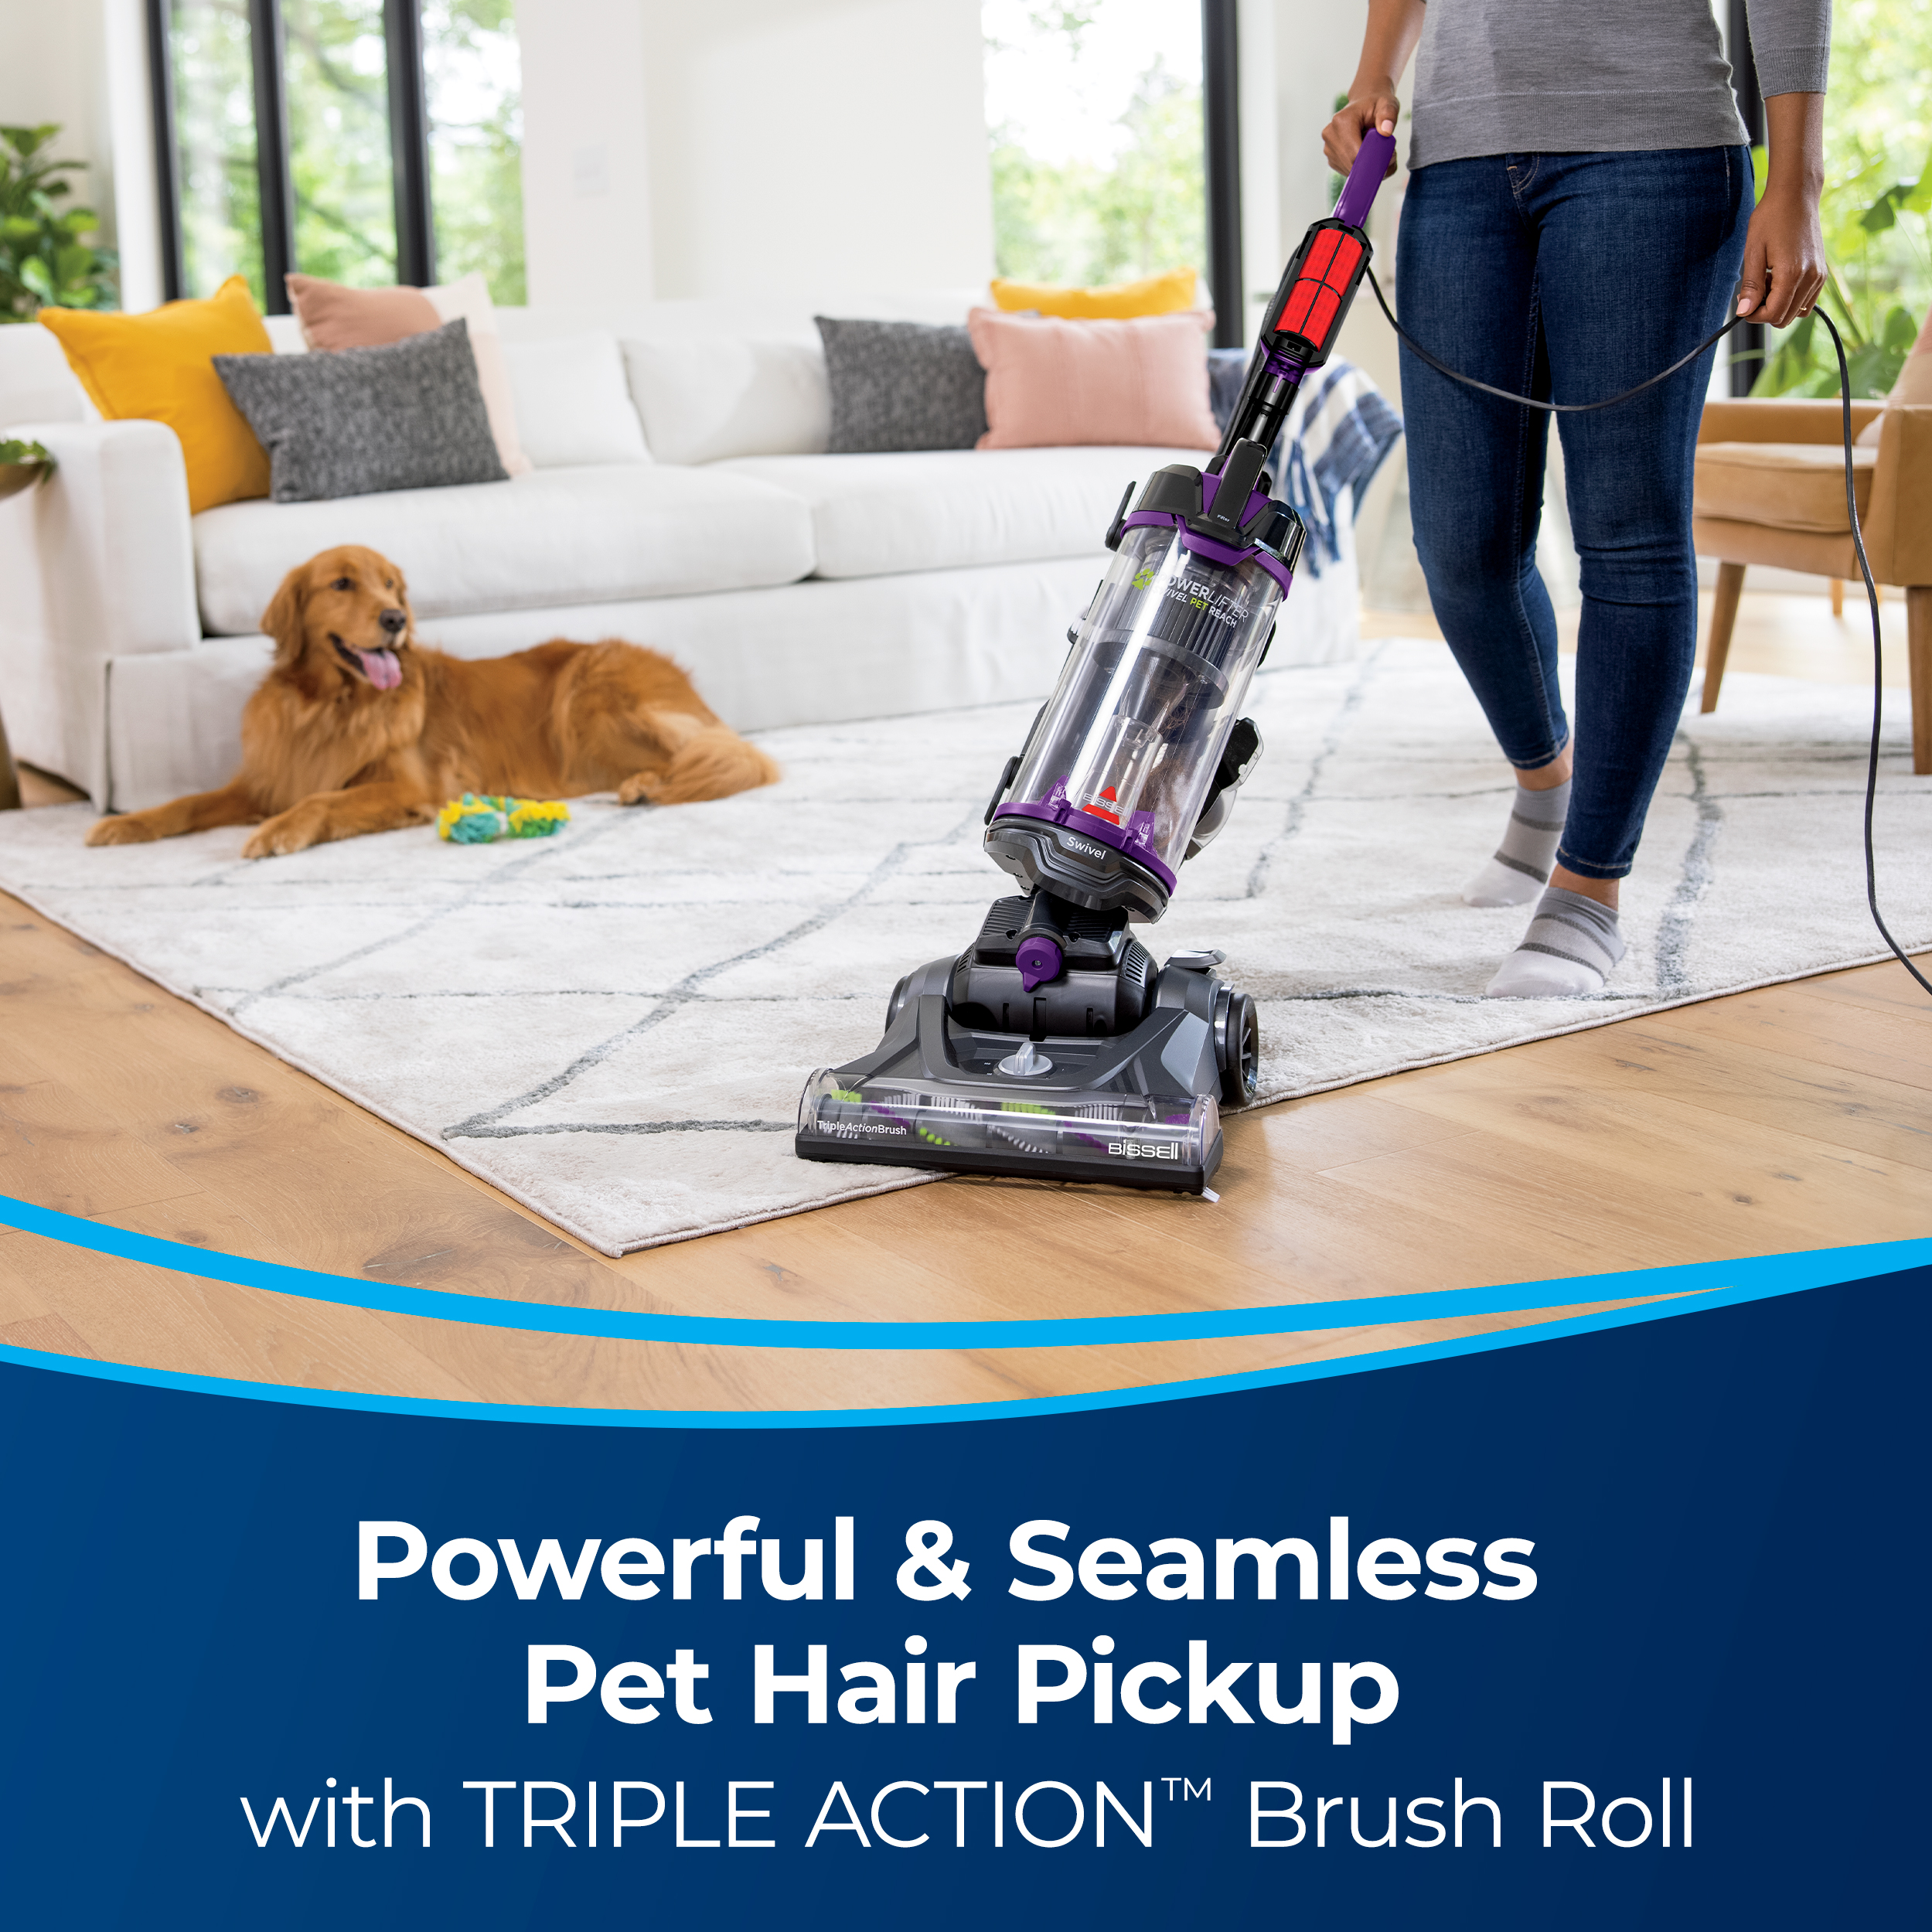 BISSELL PowerLifter Swivel Pet Reach Upright Vacuum 3196 - image 3 of 6